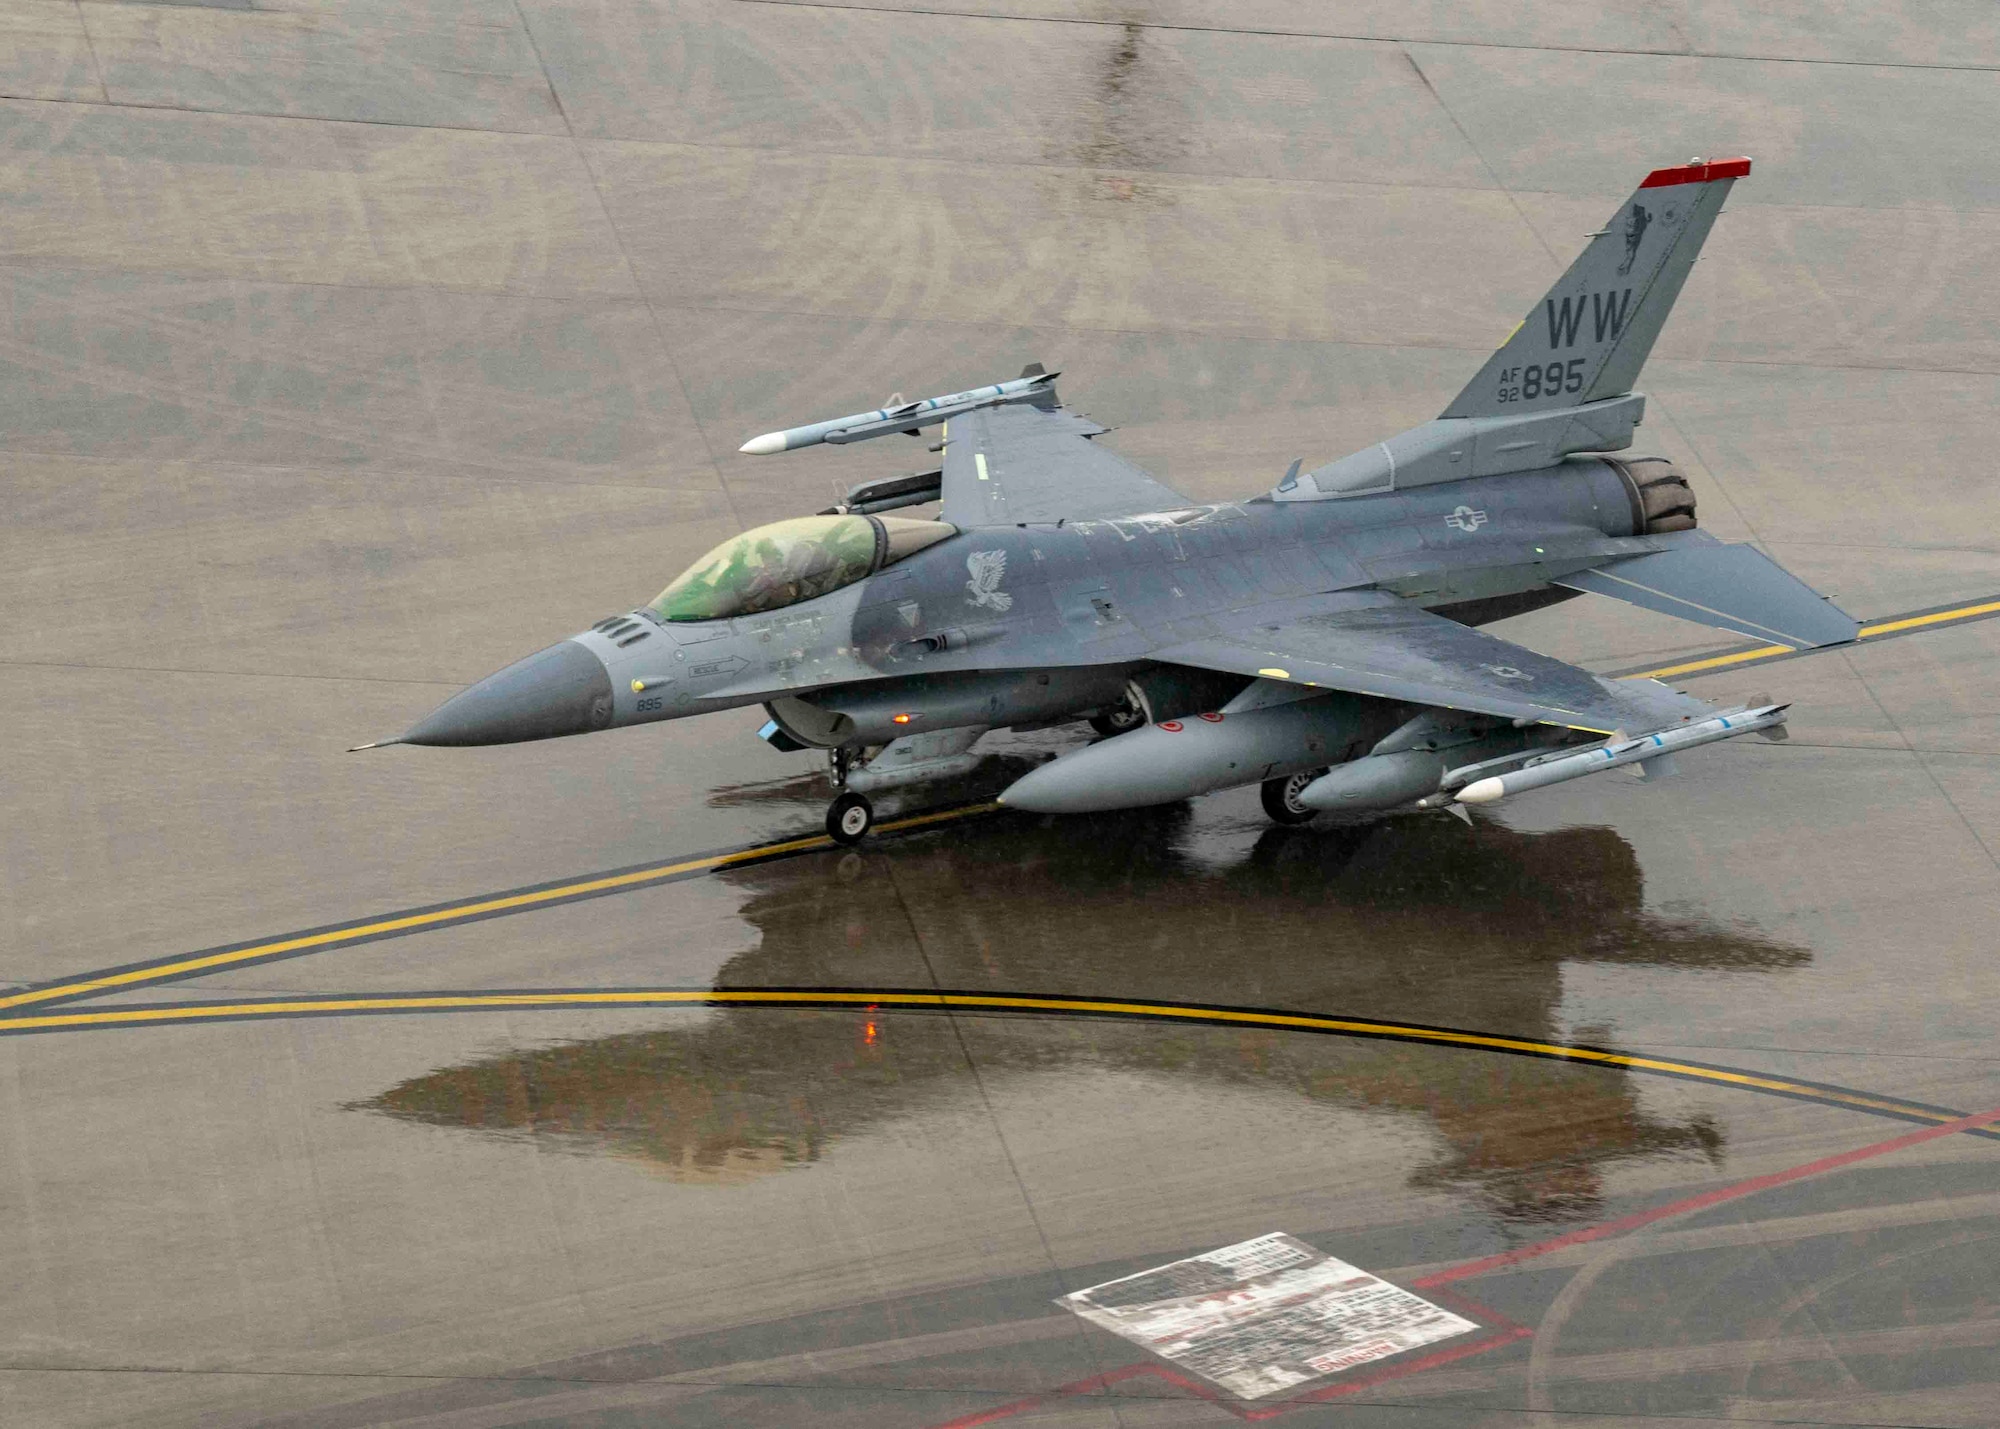 An F-16 sits on a rainy flightine. The photo is from top-down.